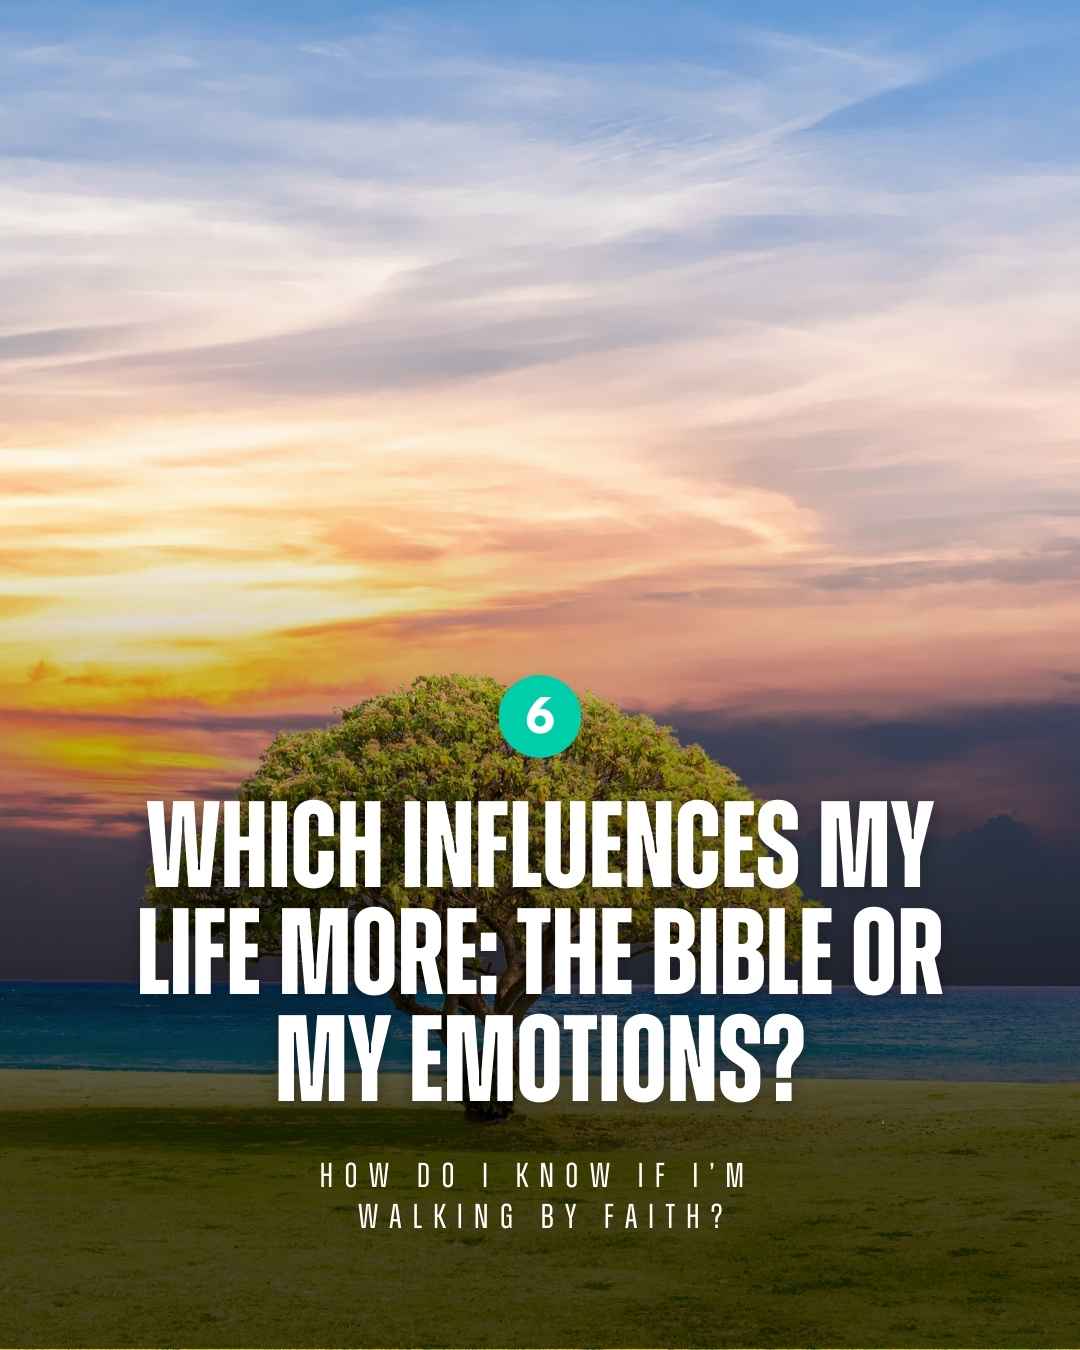 Walk by faith - Which influences my life more: the Bible or my emotions?